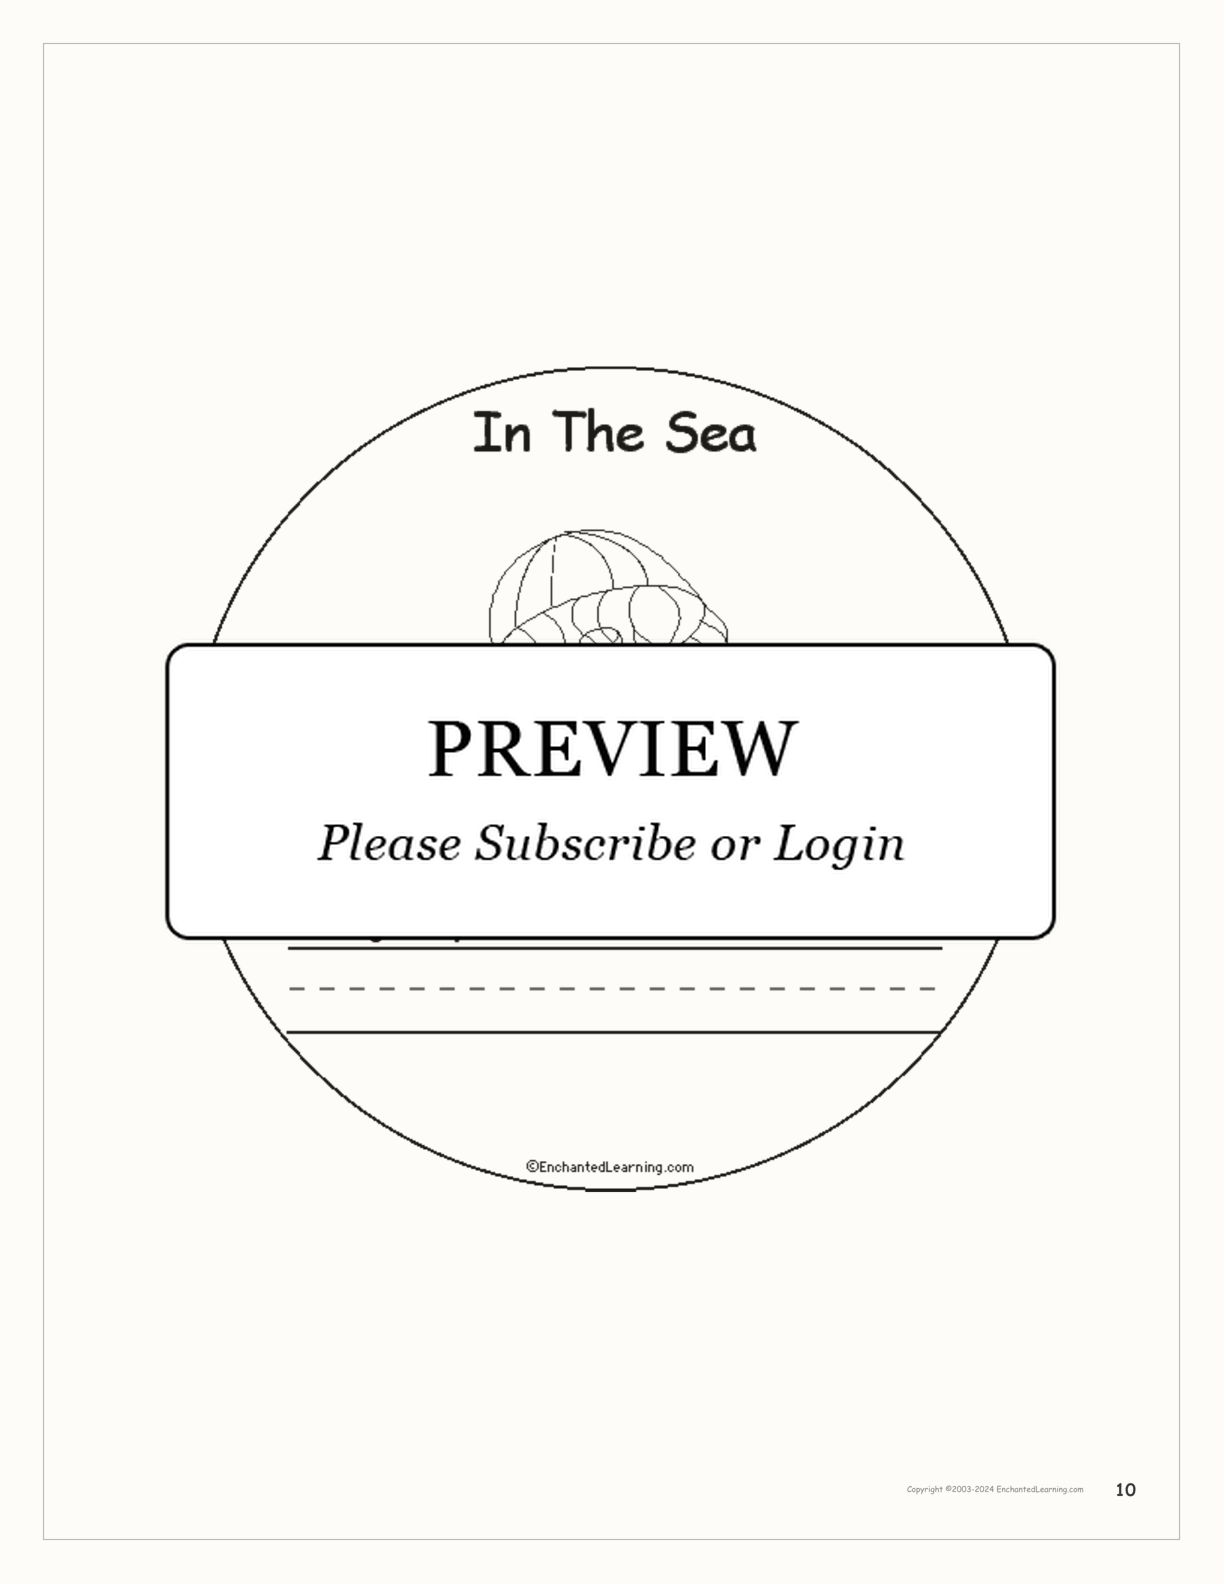 In The Sea: Early Reader Book interactive printout page 10